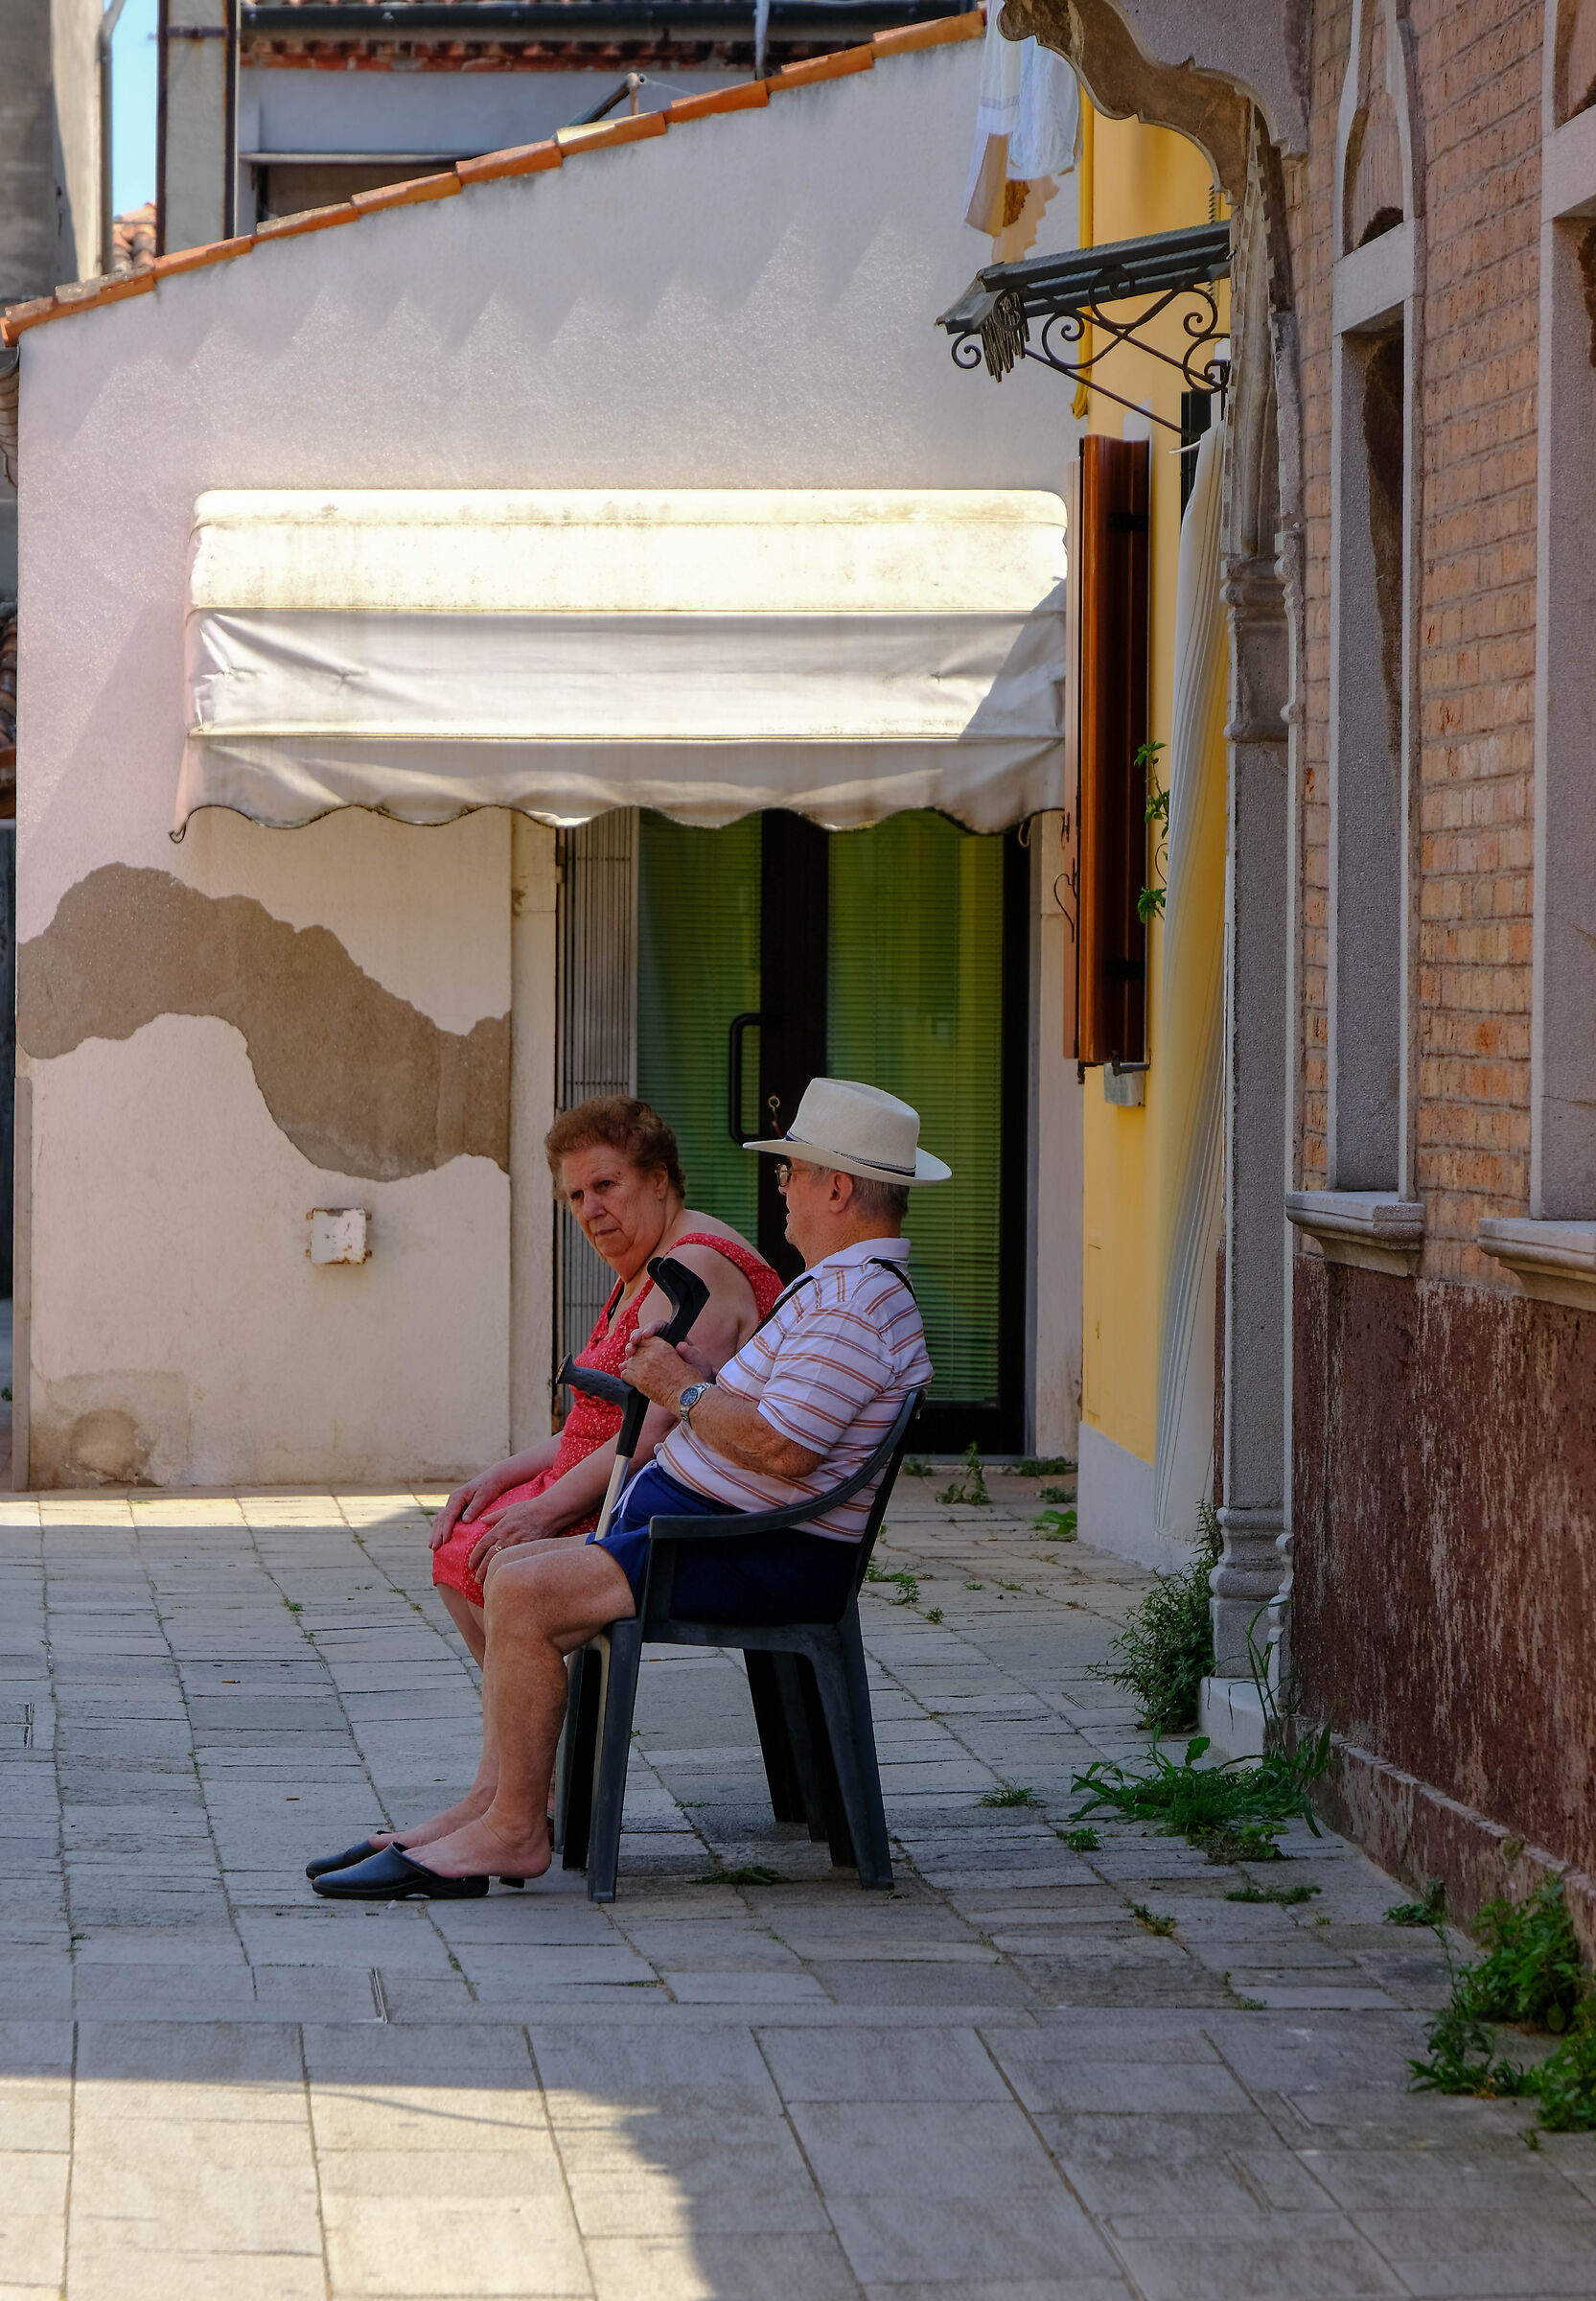 Burano, in the shade...